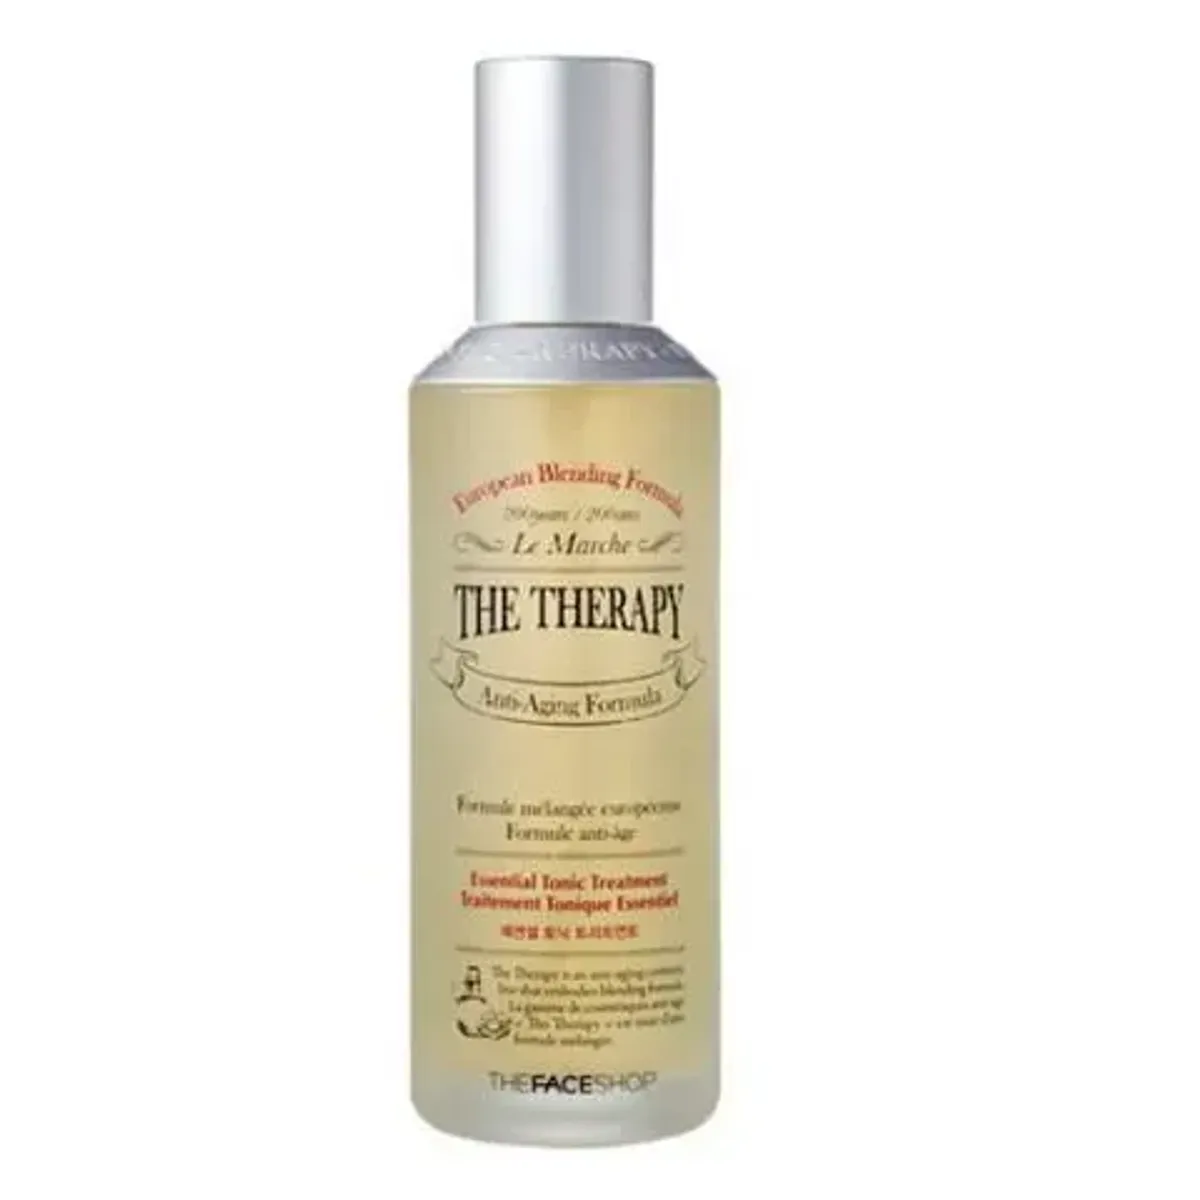 the-therapy-essential-tonic-treatment-1